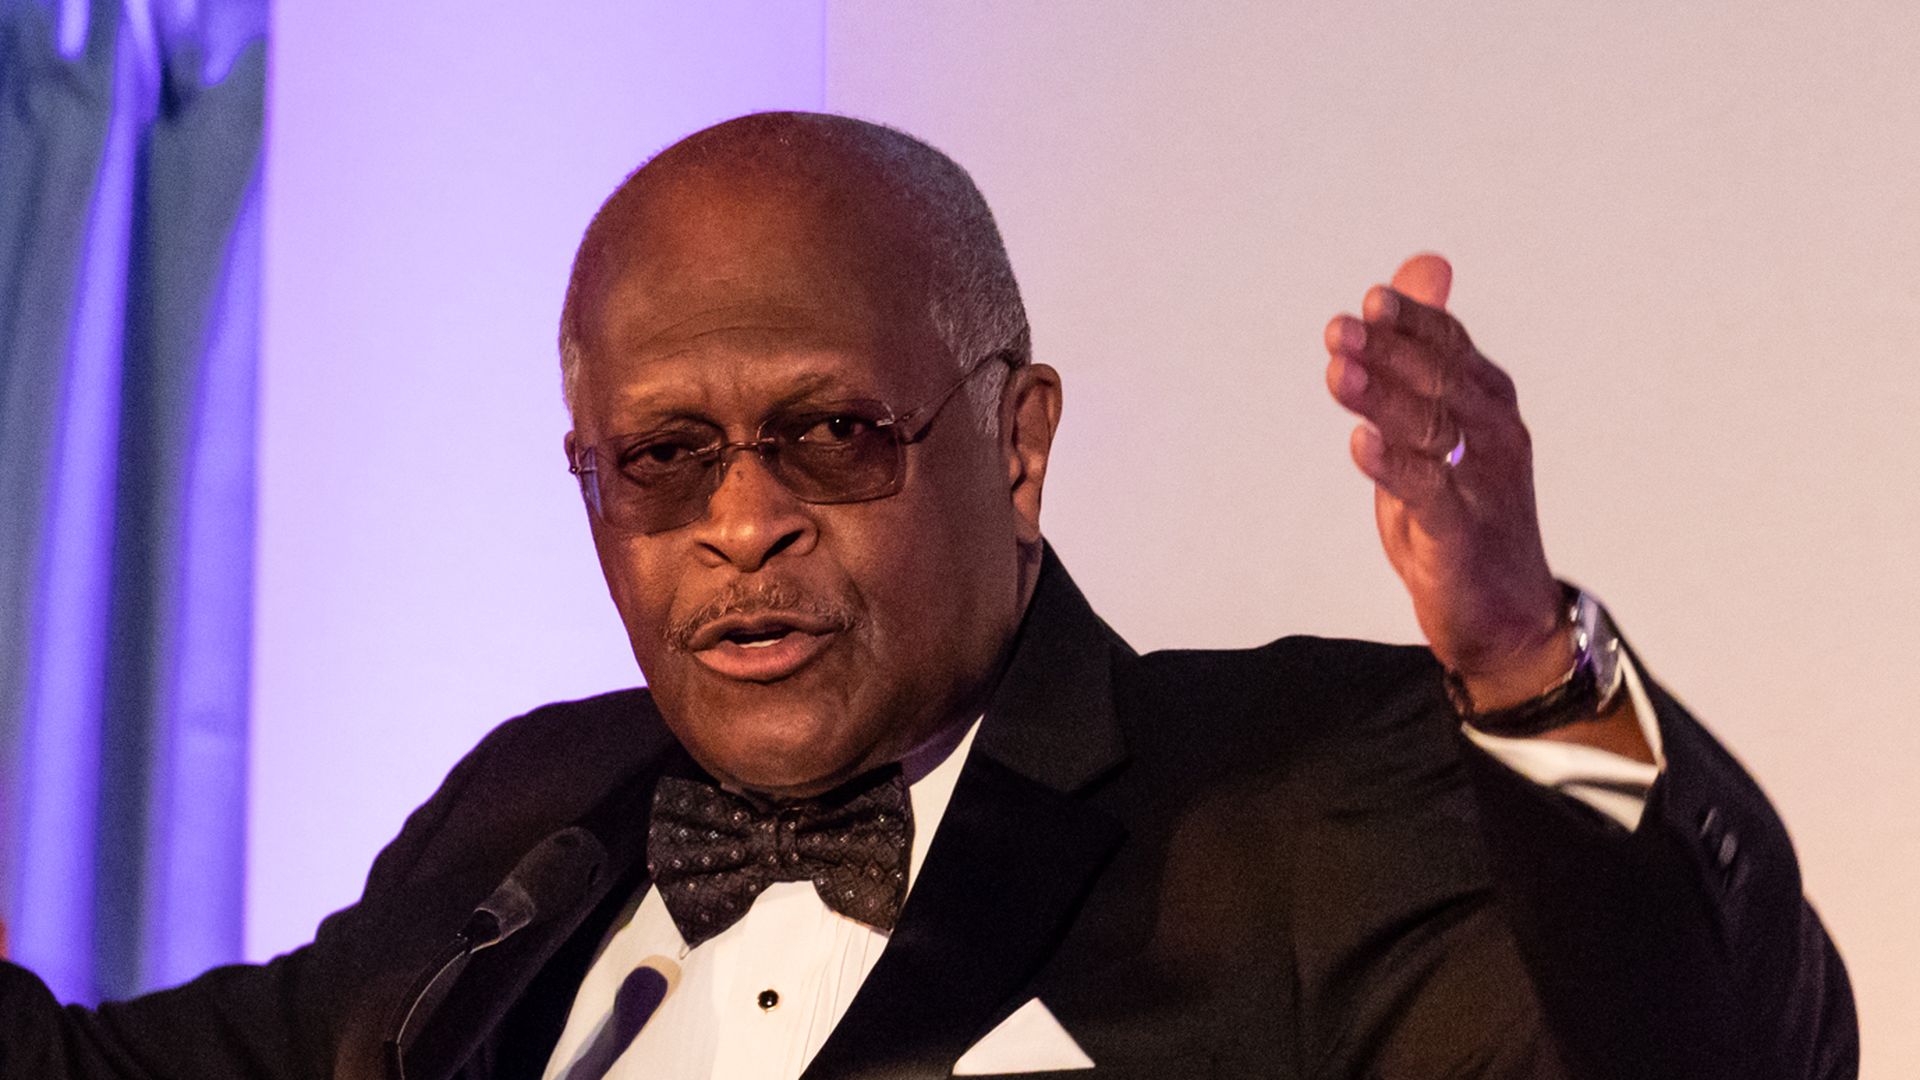 Herman Cain says the sexual misconduct accusations leveled against him did not impact his decision to turn down President Donald Trump‘s nomination.